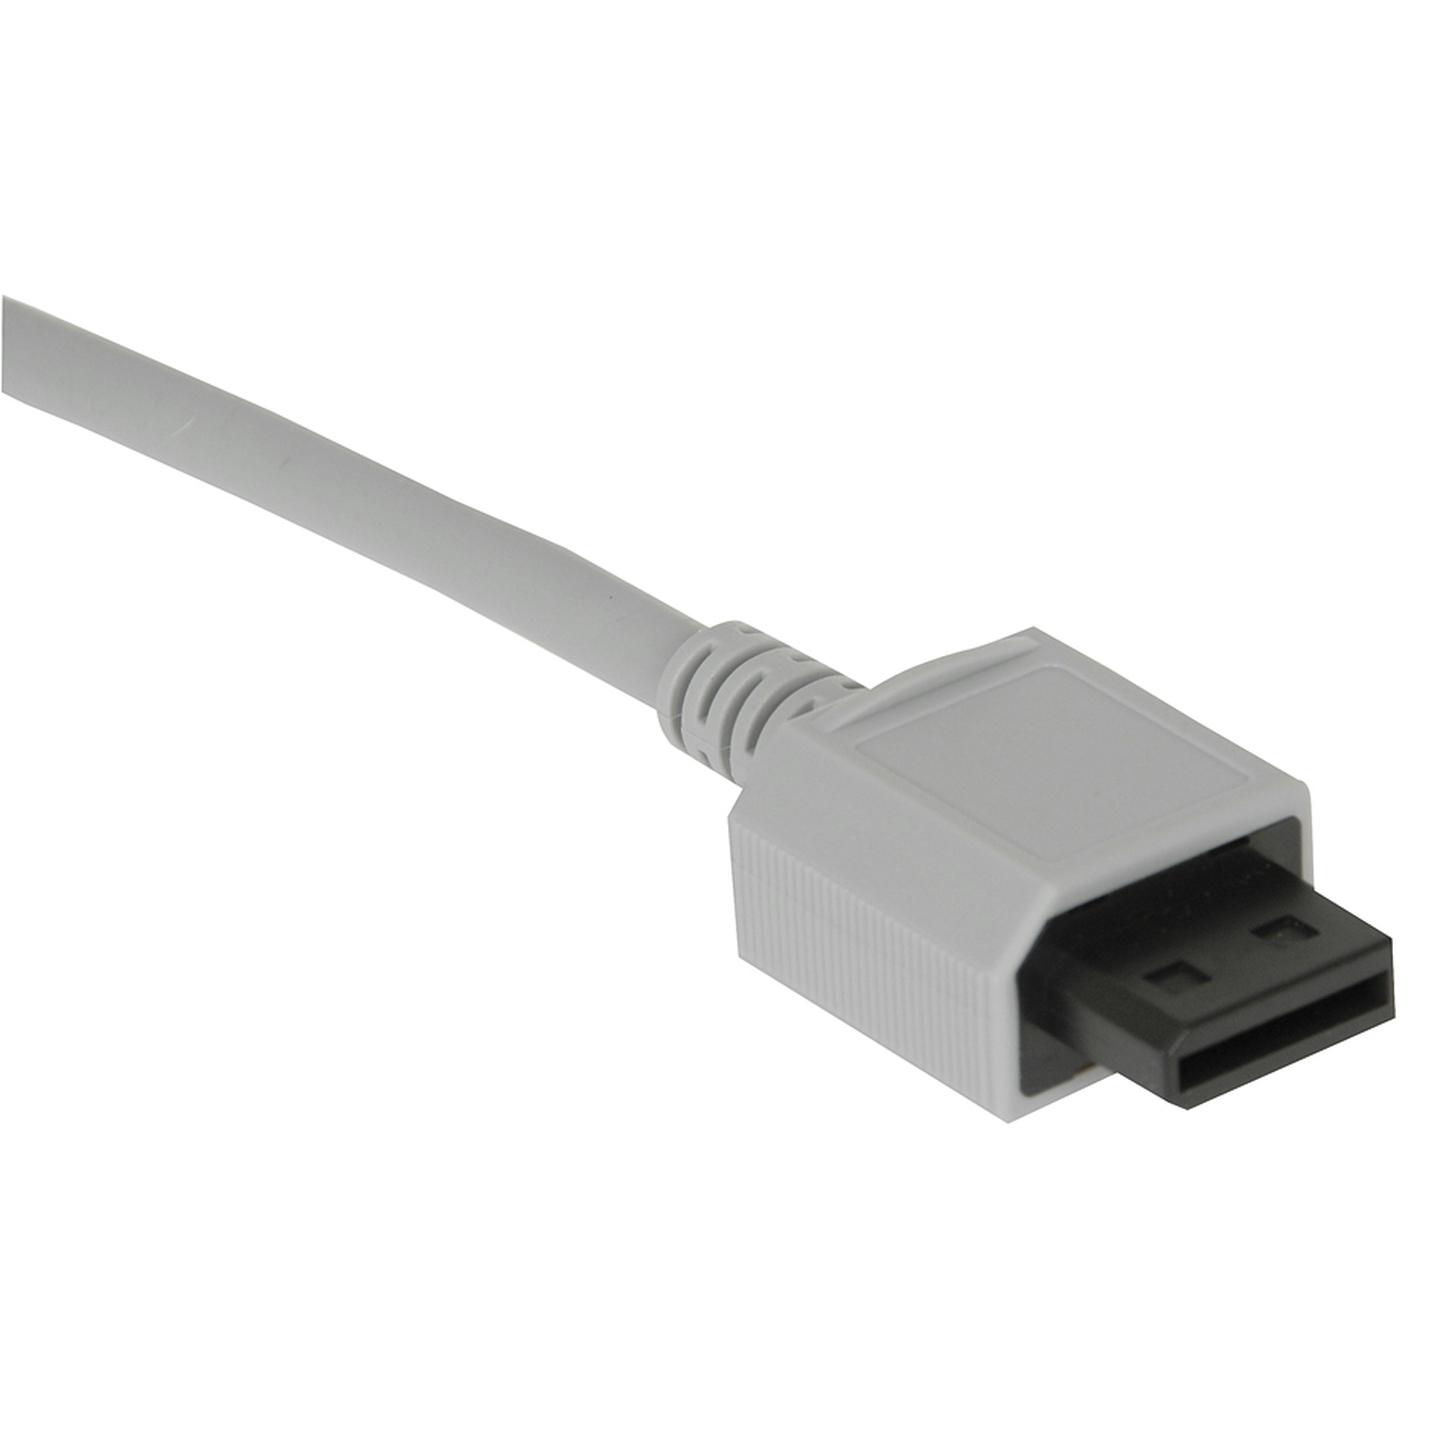 Nintendo Wii S-Video Upgrade Cable